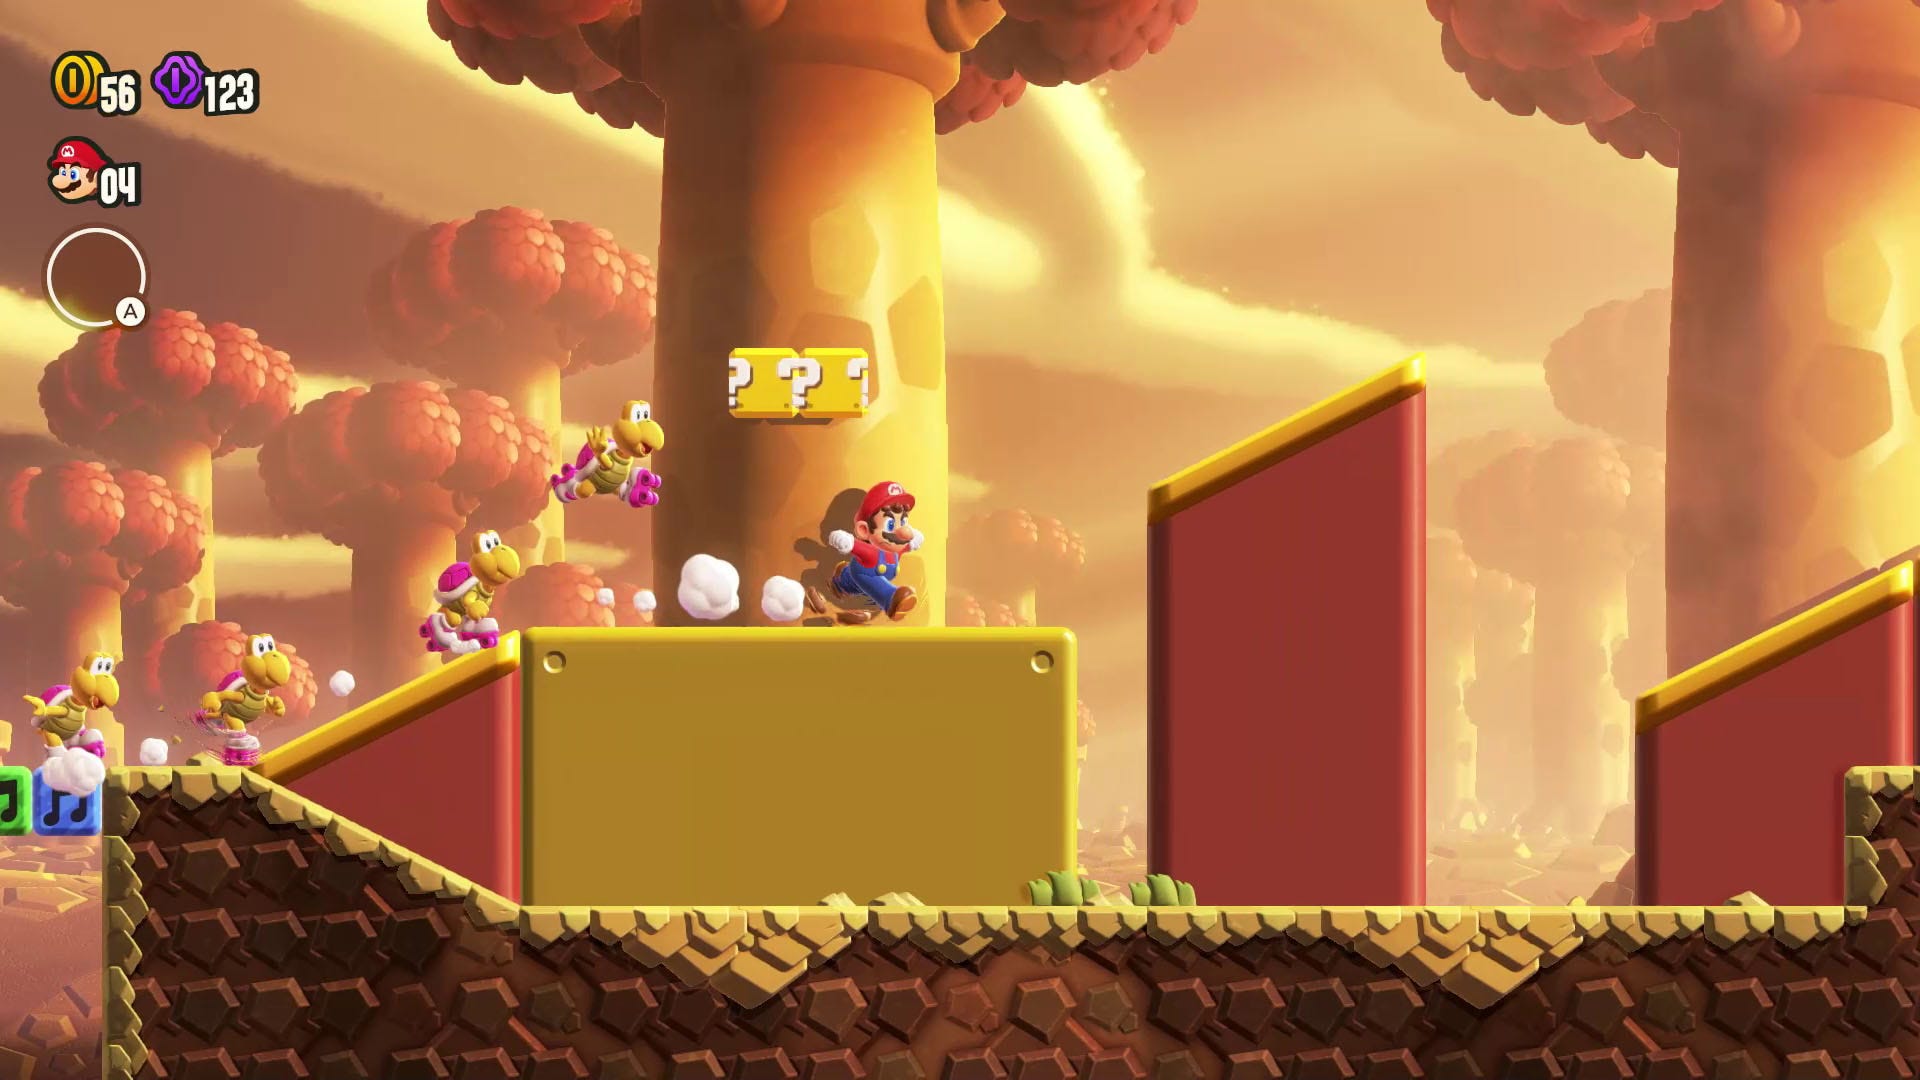 Super Mario Bros. Wonder appears to be the 2D Mario I've wanted for 20 years - Super Mario